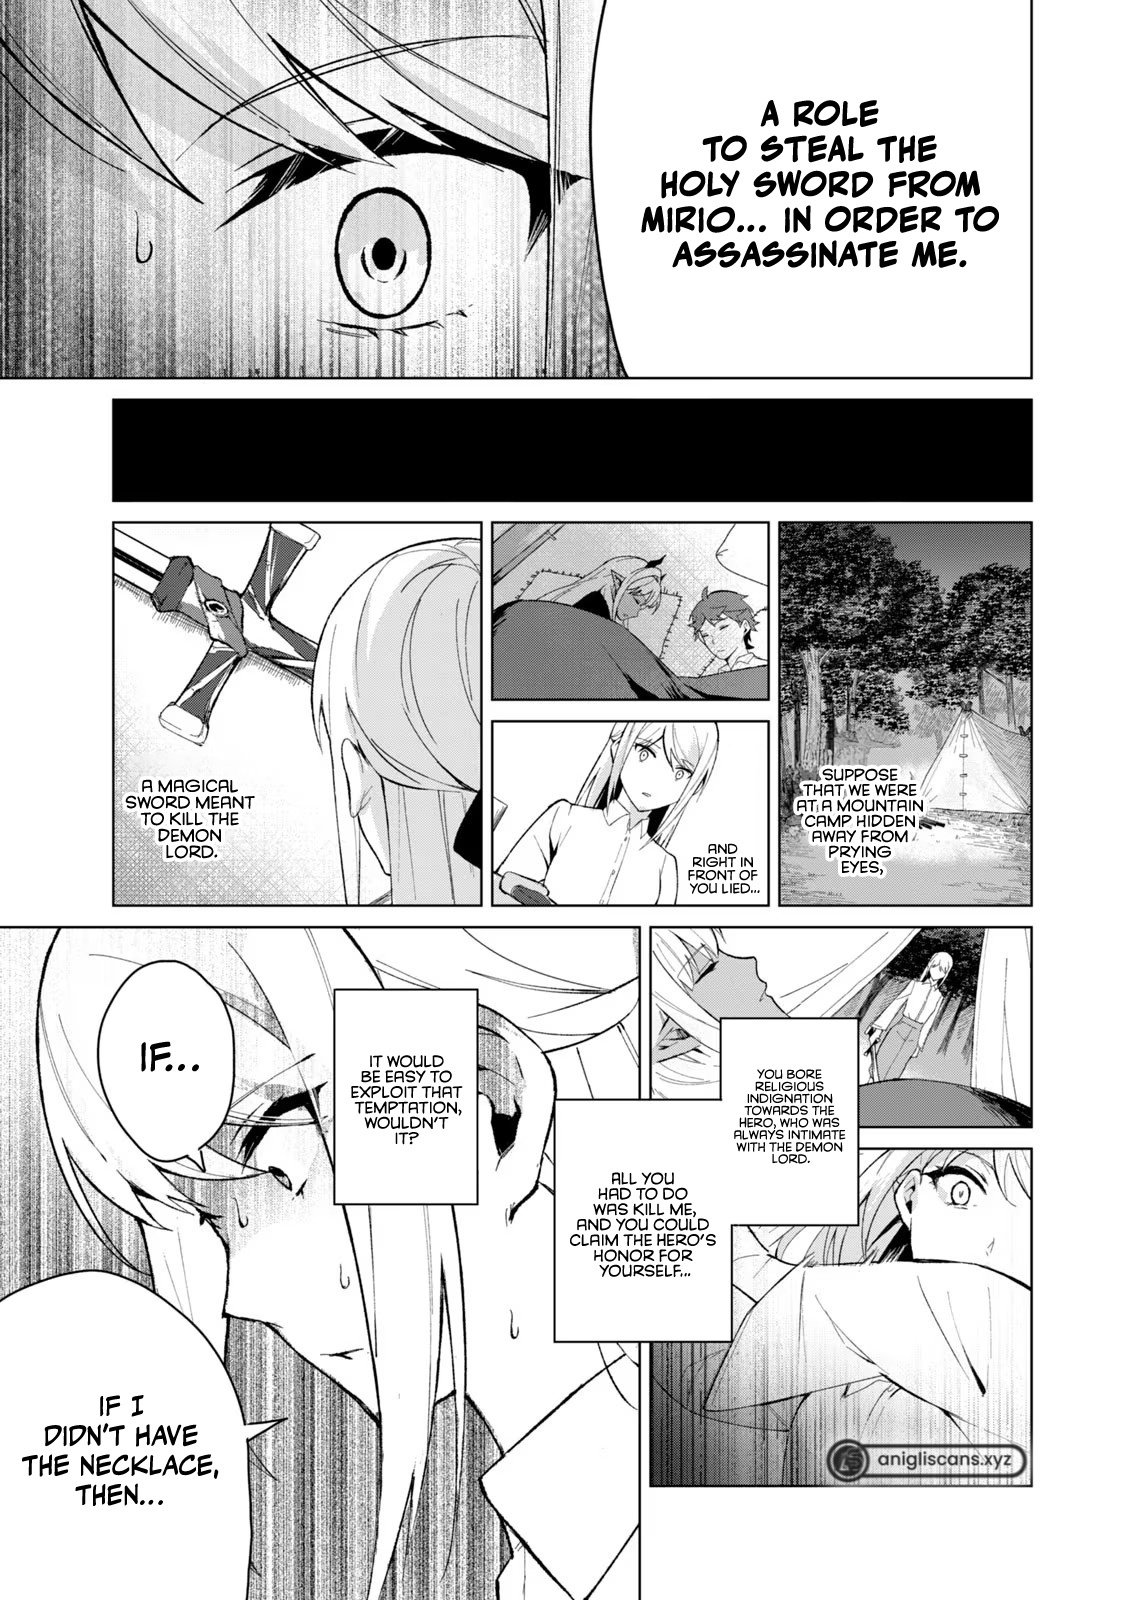 A Story About A Hero Exterminating A Dragon-Class Beautiful Girl Demon Queen, Who Has Very Low Self-Esteem, With Love! Chapter 13 #14